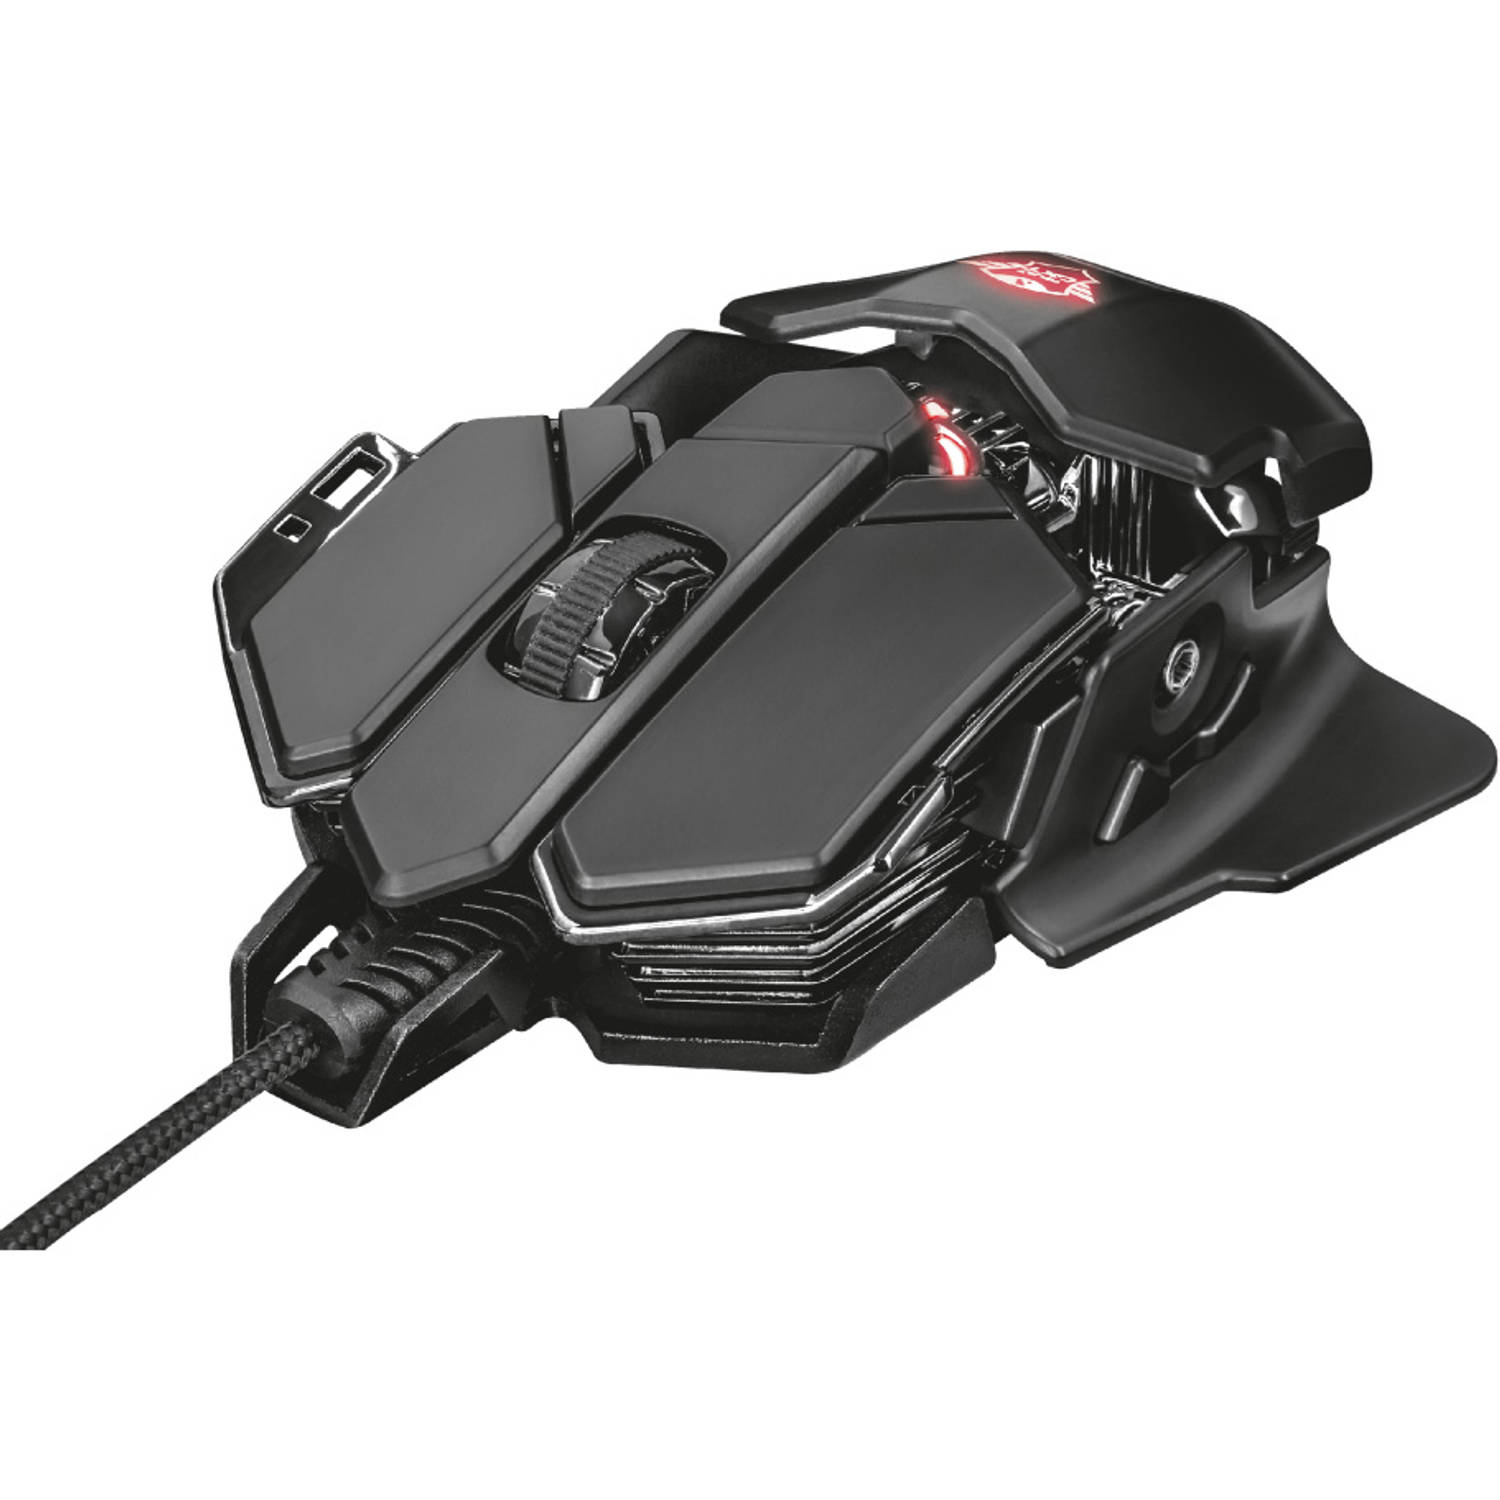 X-Ray illu gaming mouse GXT138